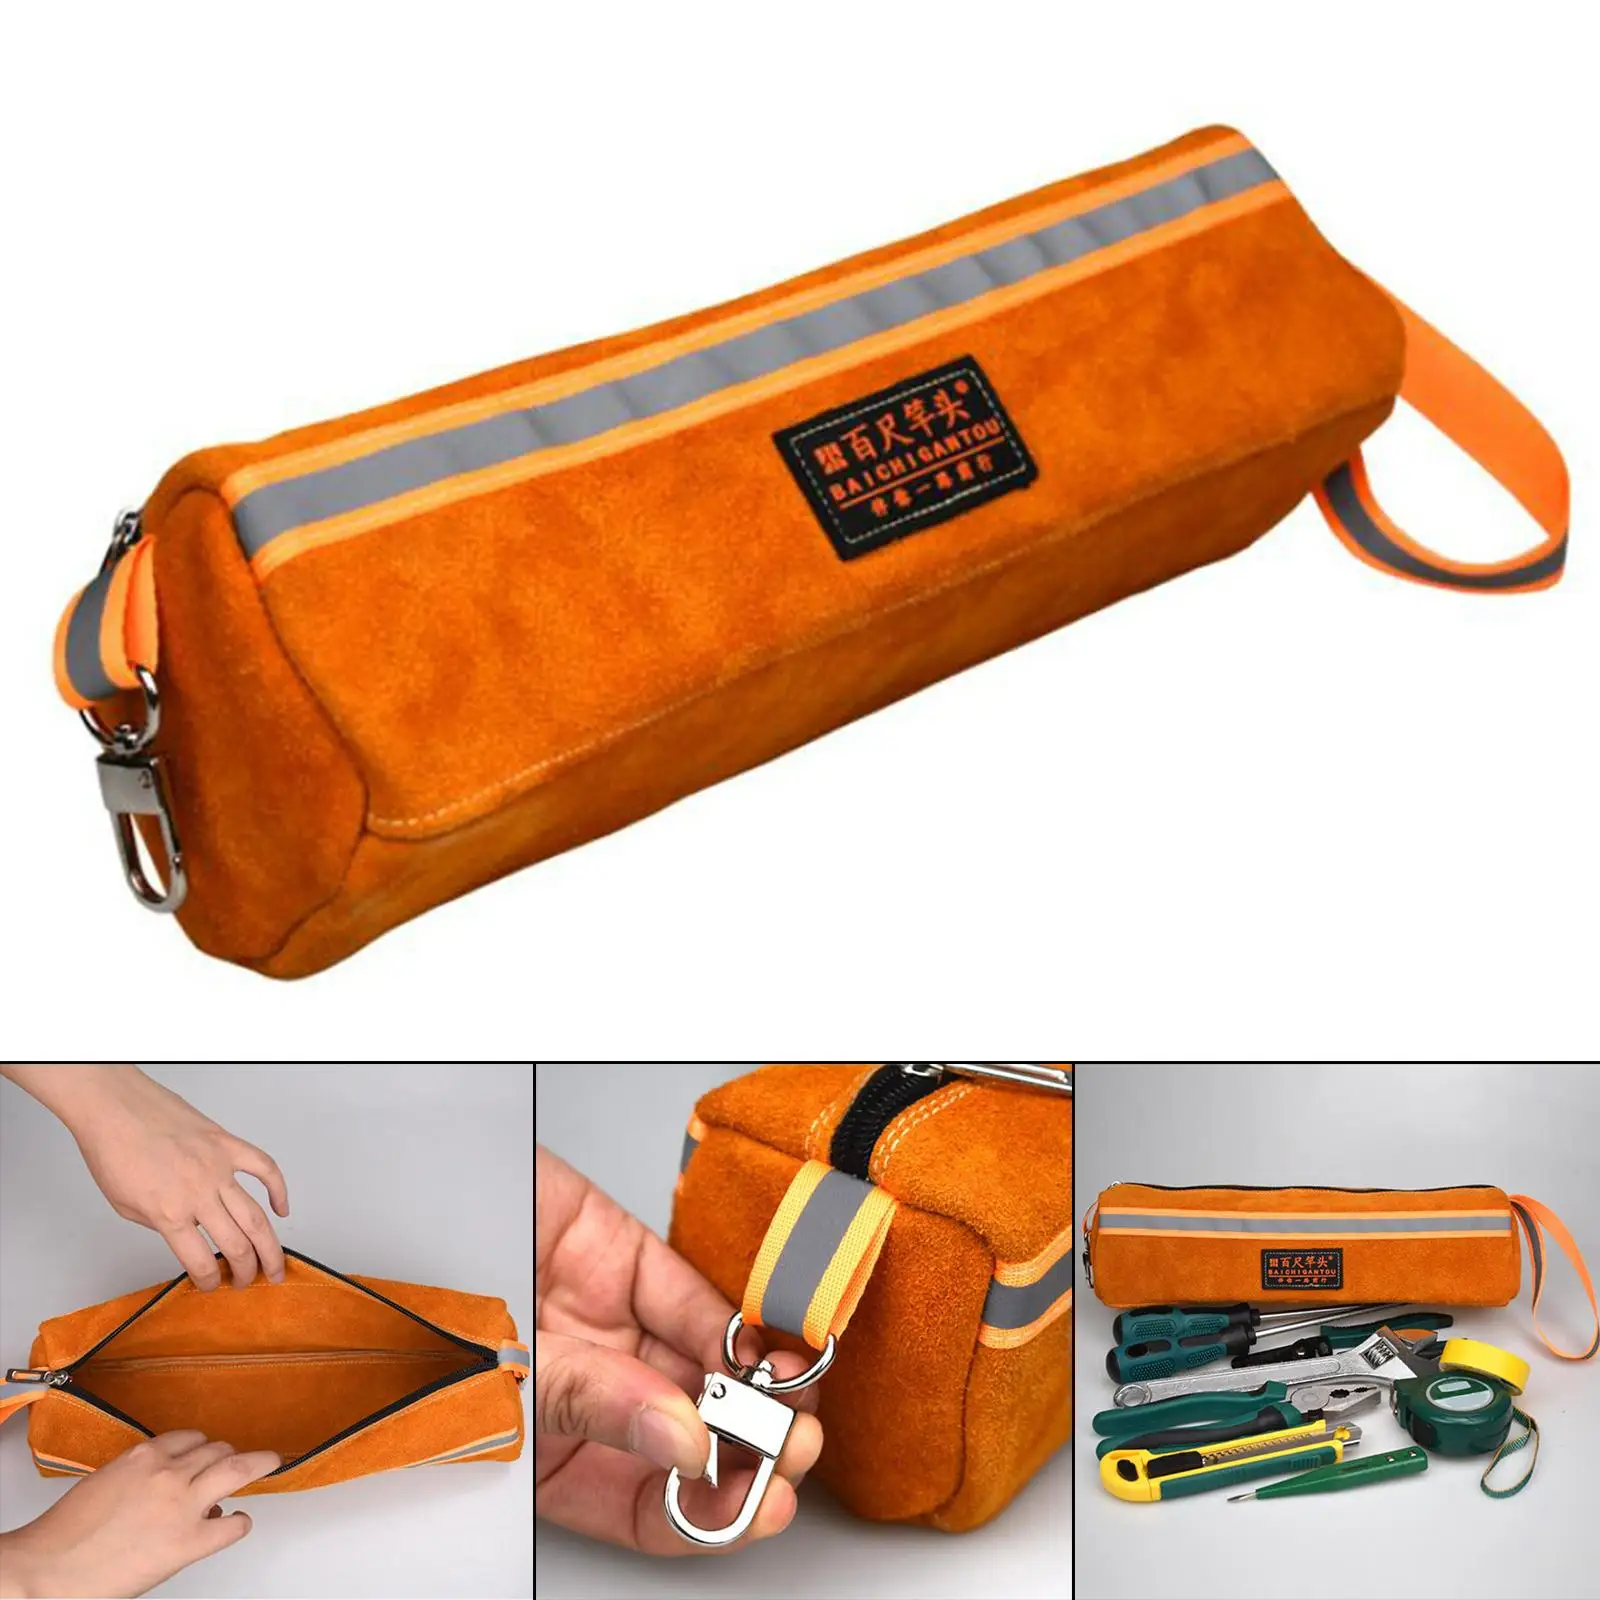 Portable Tool Bag Zipper Pliers Wrench Screwdriver Tote Bag Heavy Duty for Handyman Construction Camping Electrician Gardening